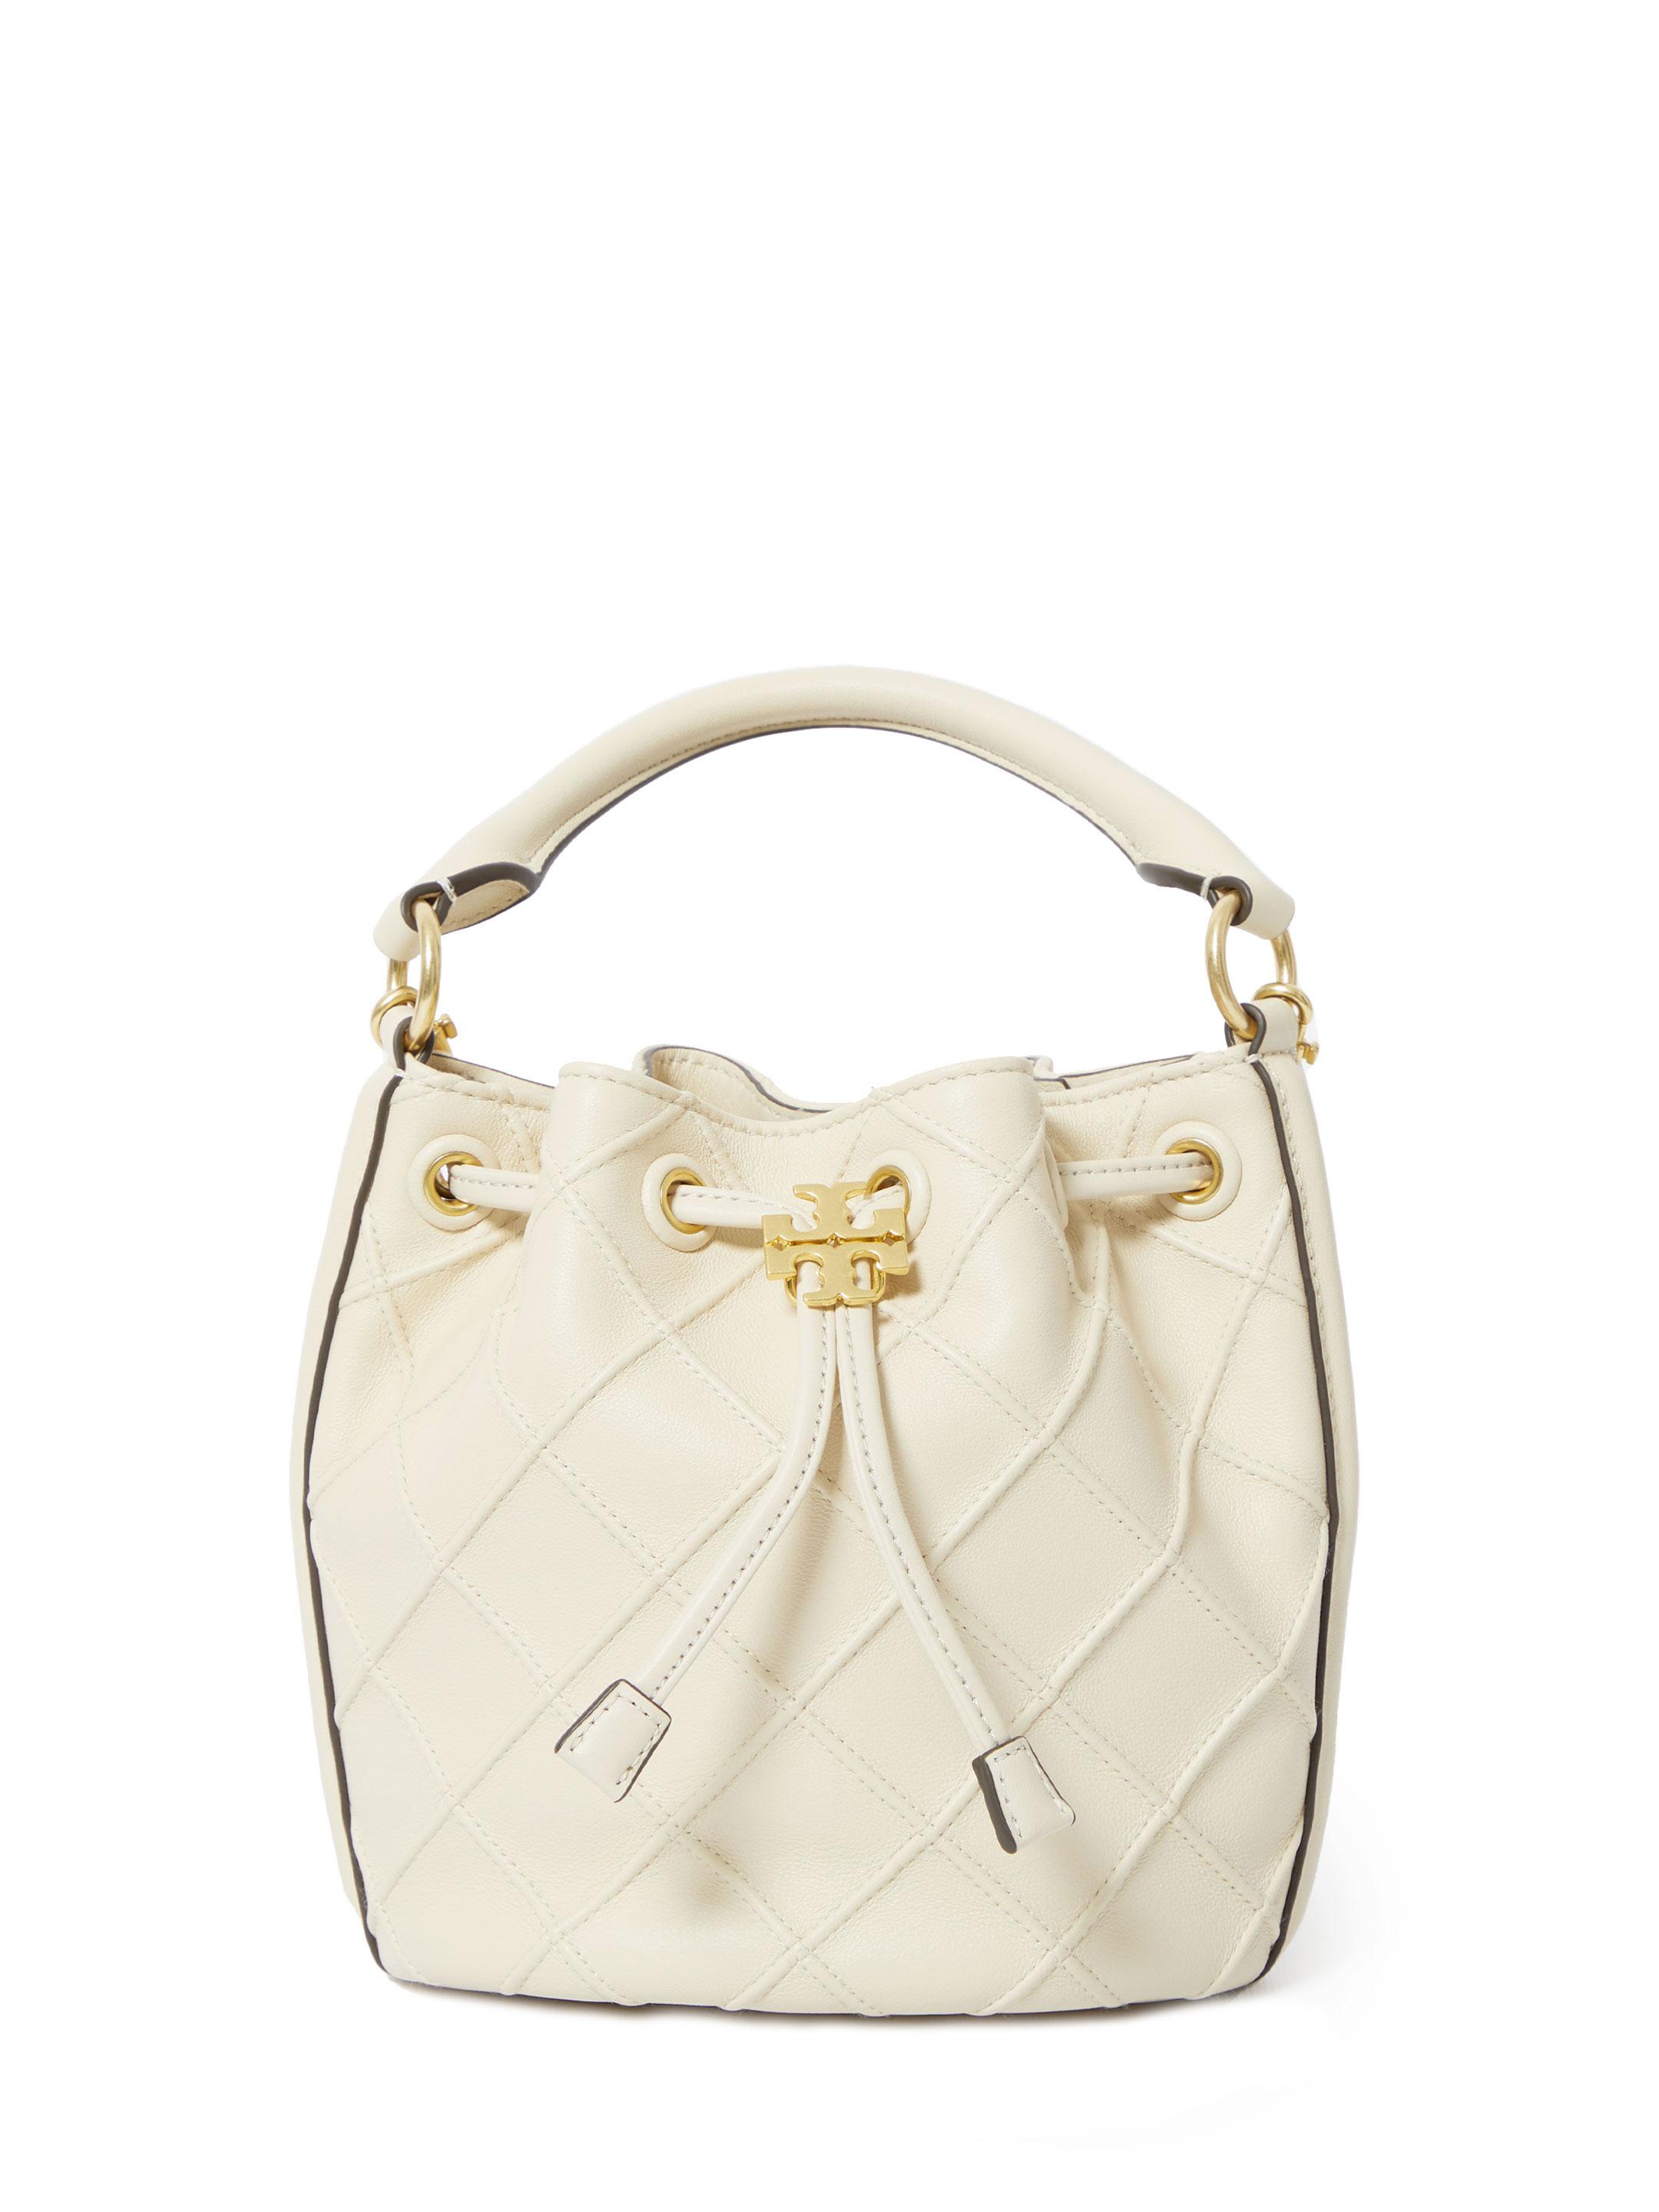 Tory Burch Fleming Soft Bucket Bag in White